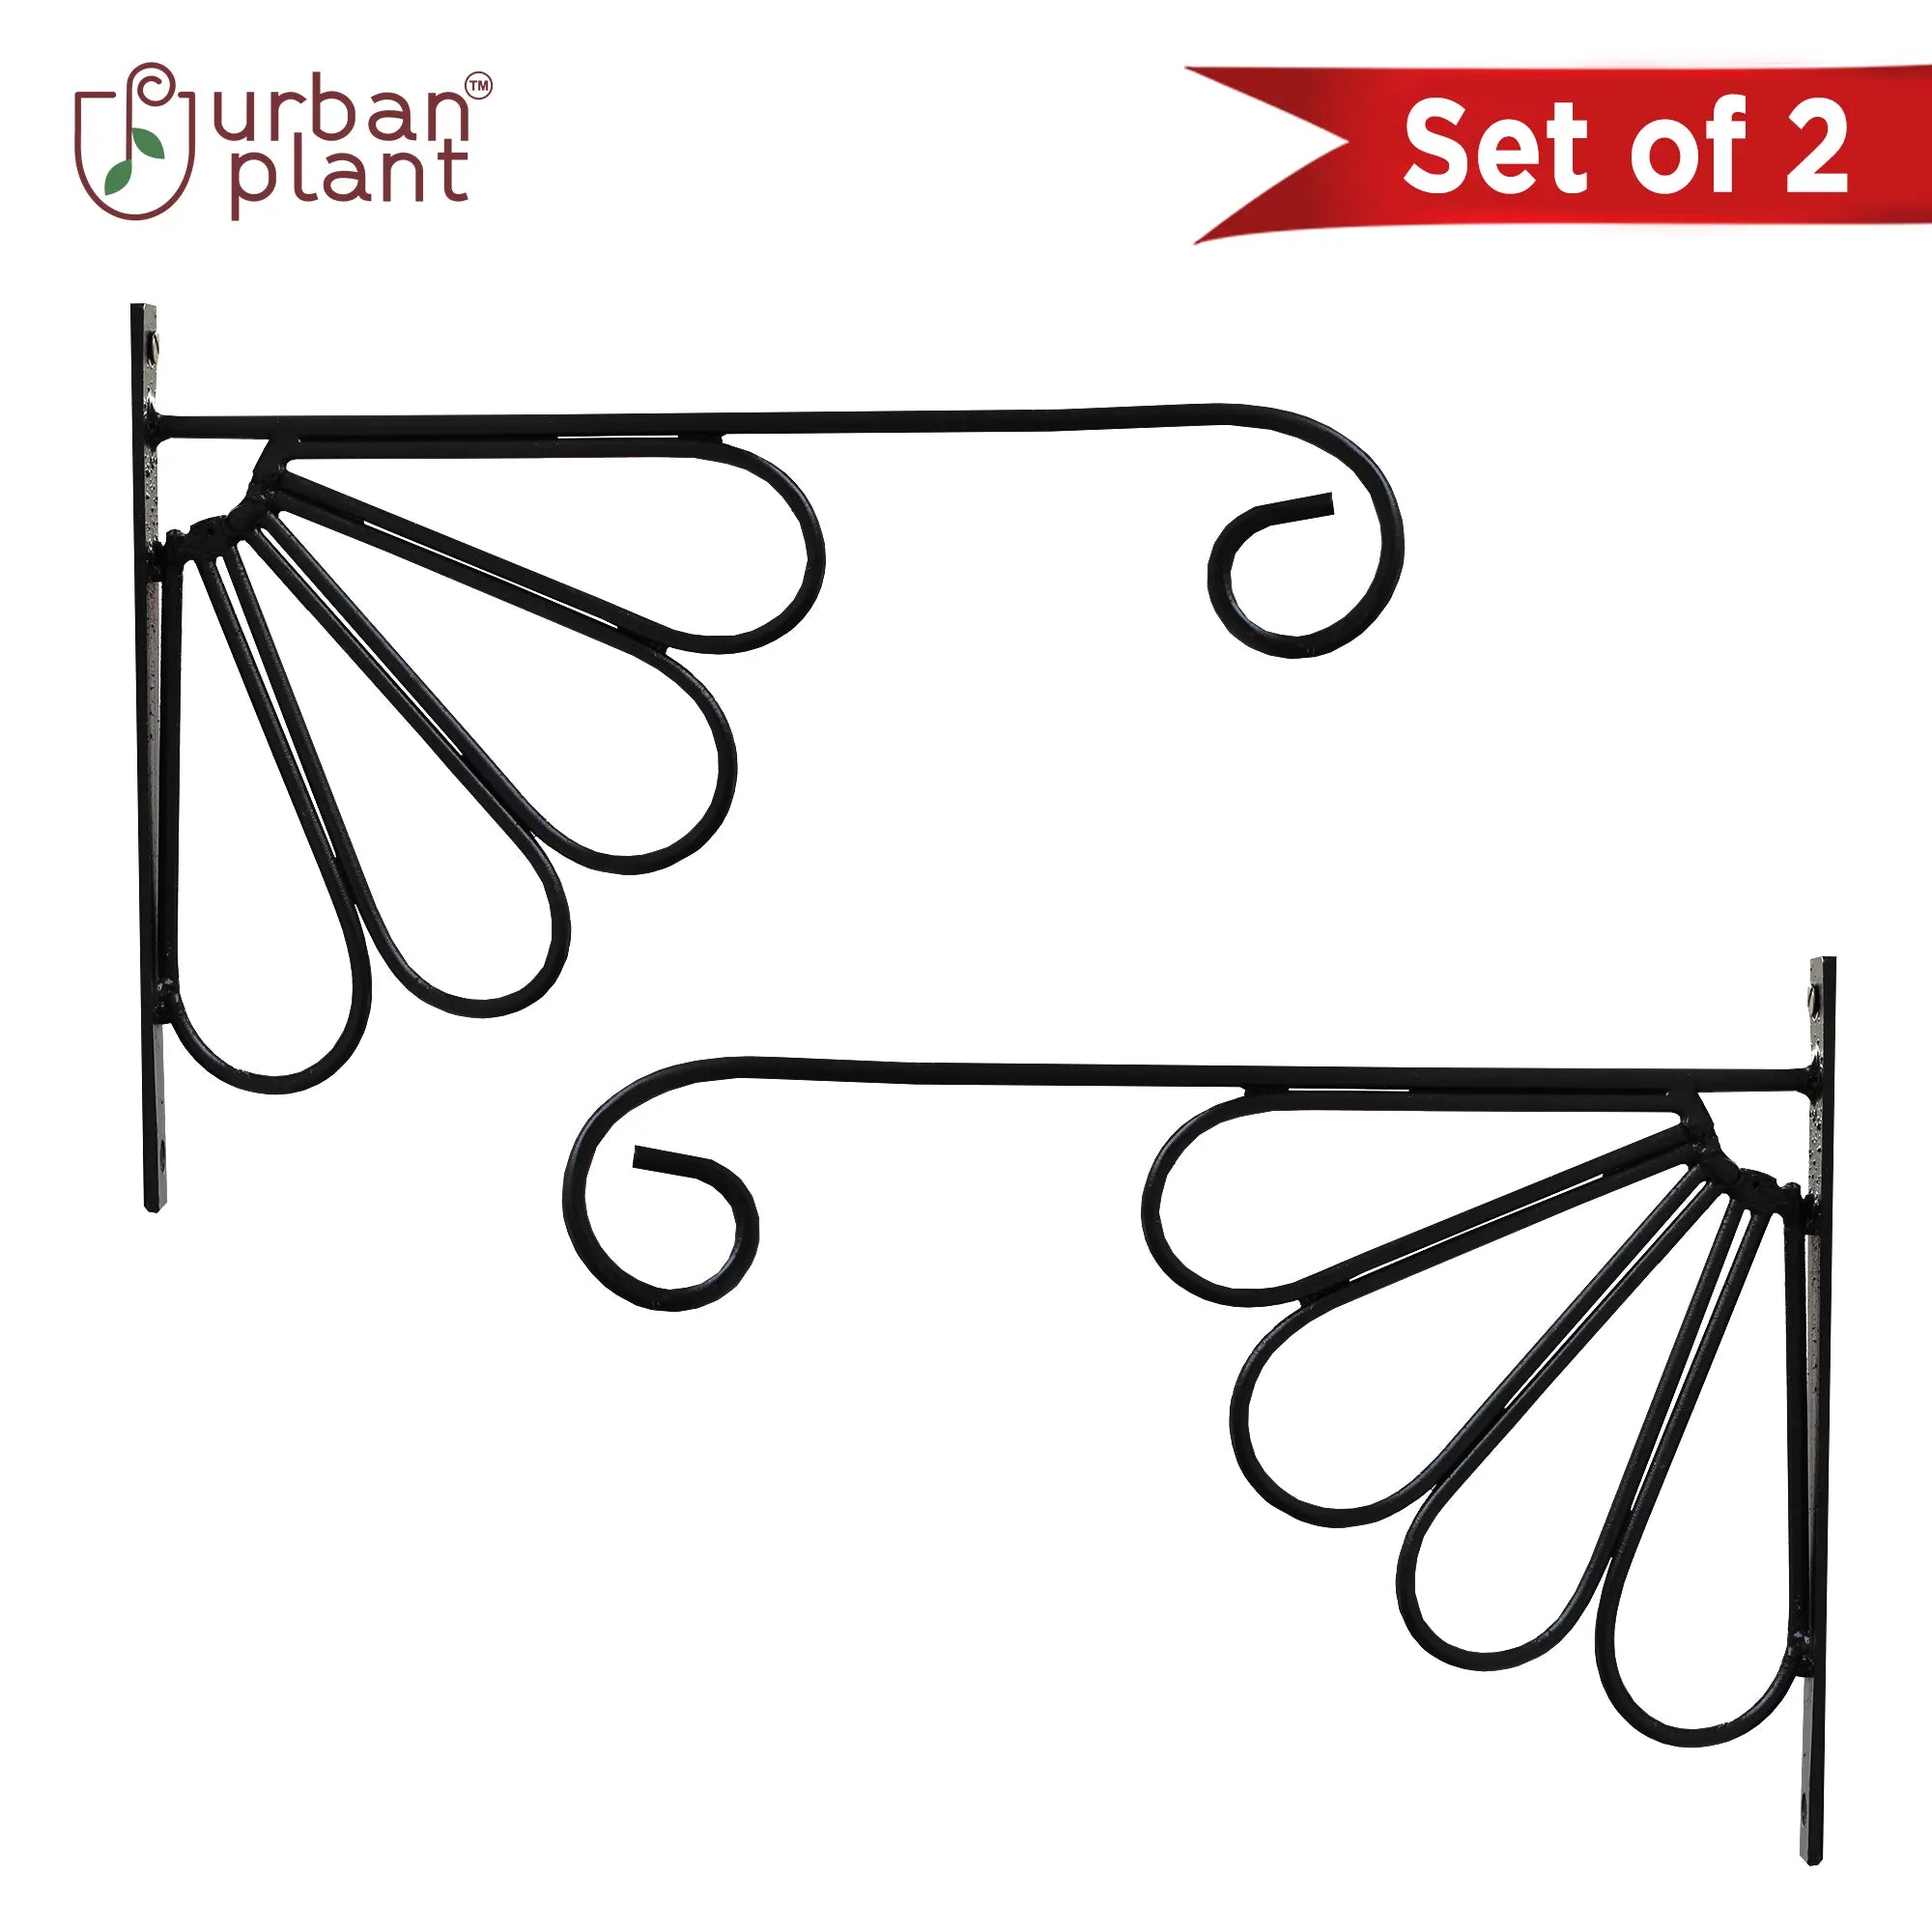 Wall Bracket for Plants (Set of 2) Wall Hanging Planter Urban Plant 